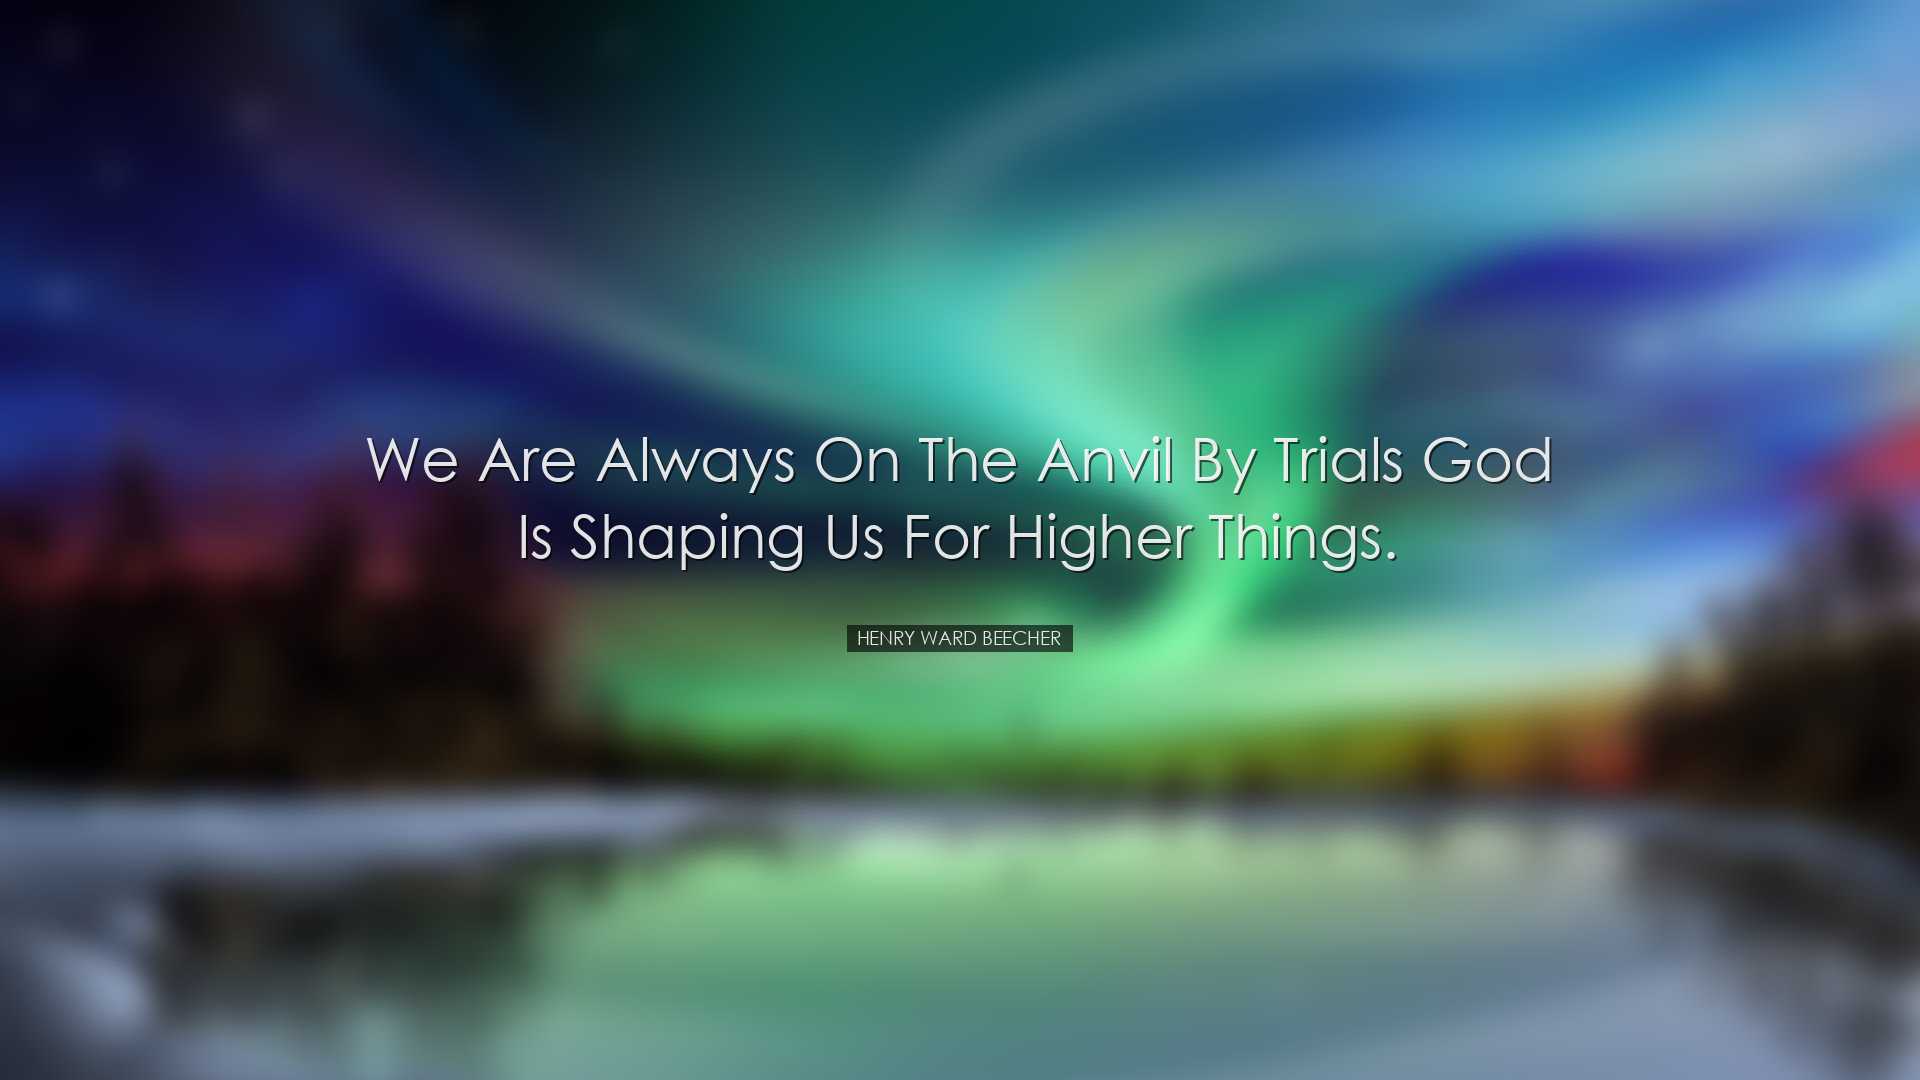 We are always on the anvil by trials God is shaping us for higher